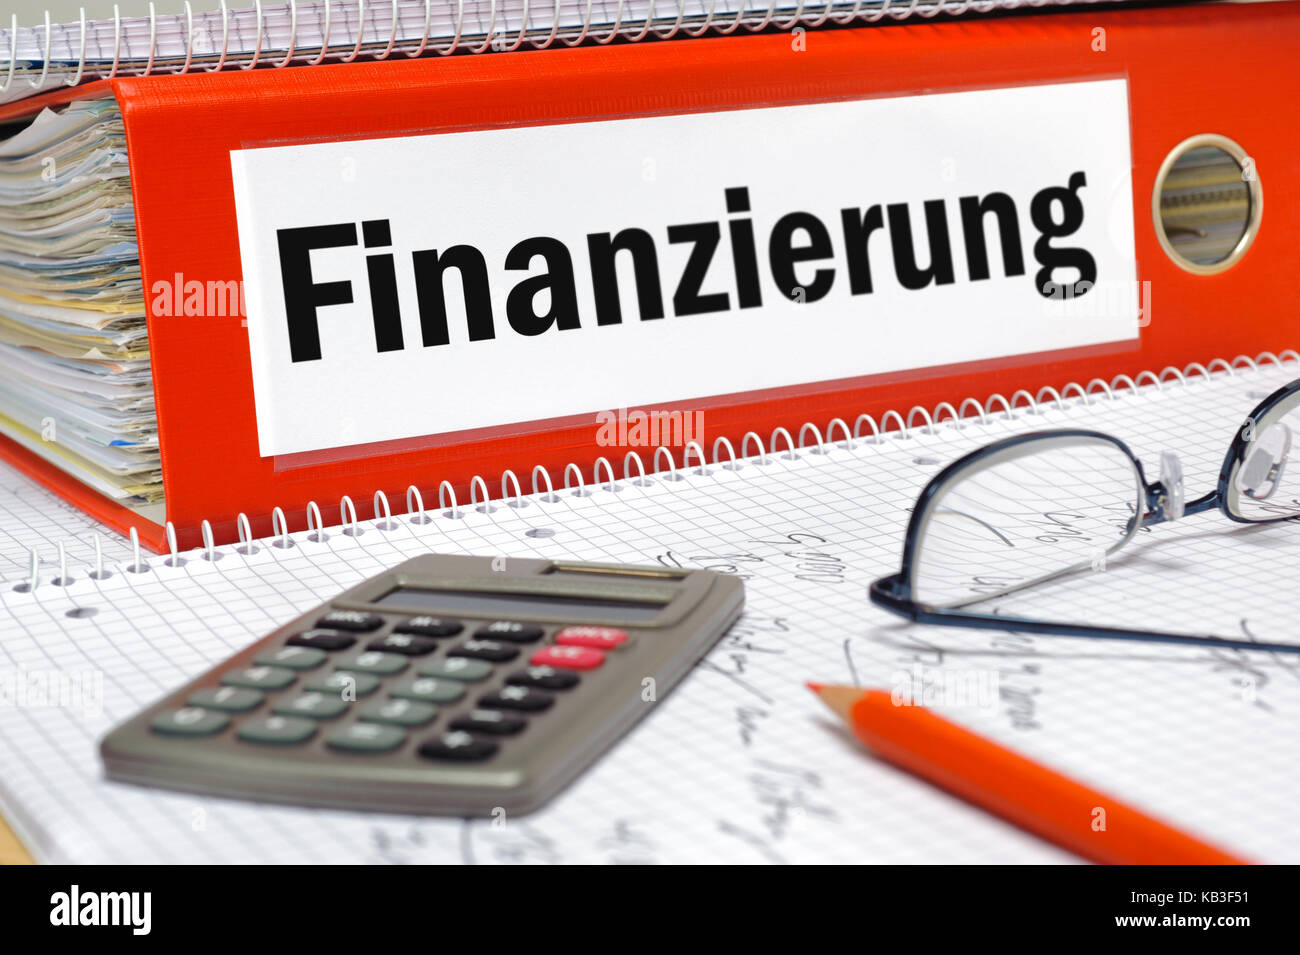 Financing, folder with documents and electronic calculator, Stock Photo